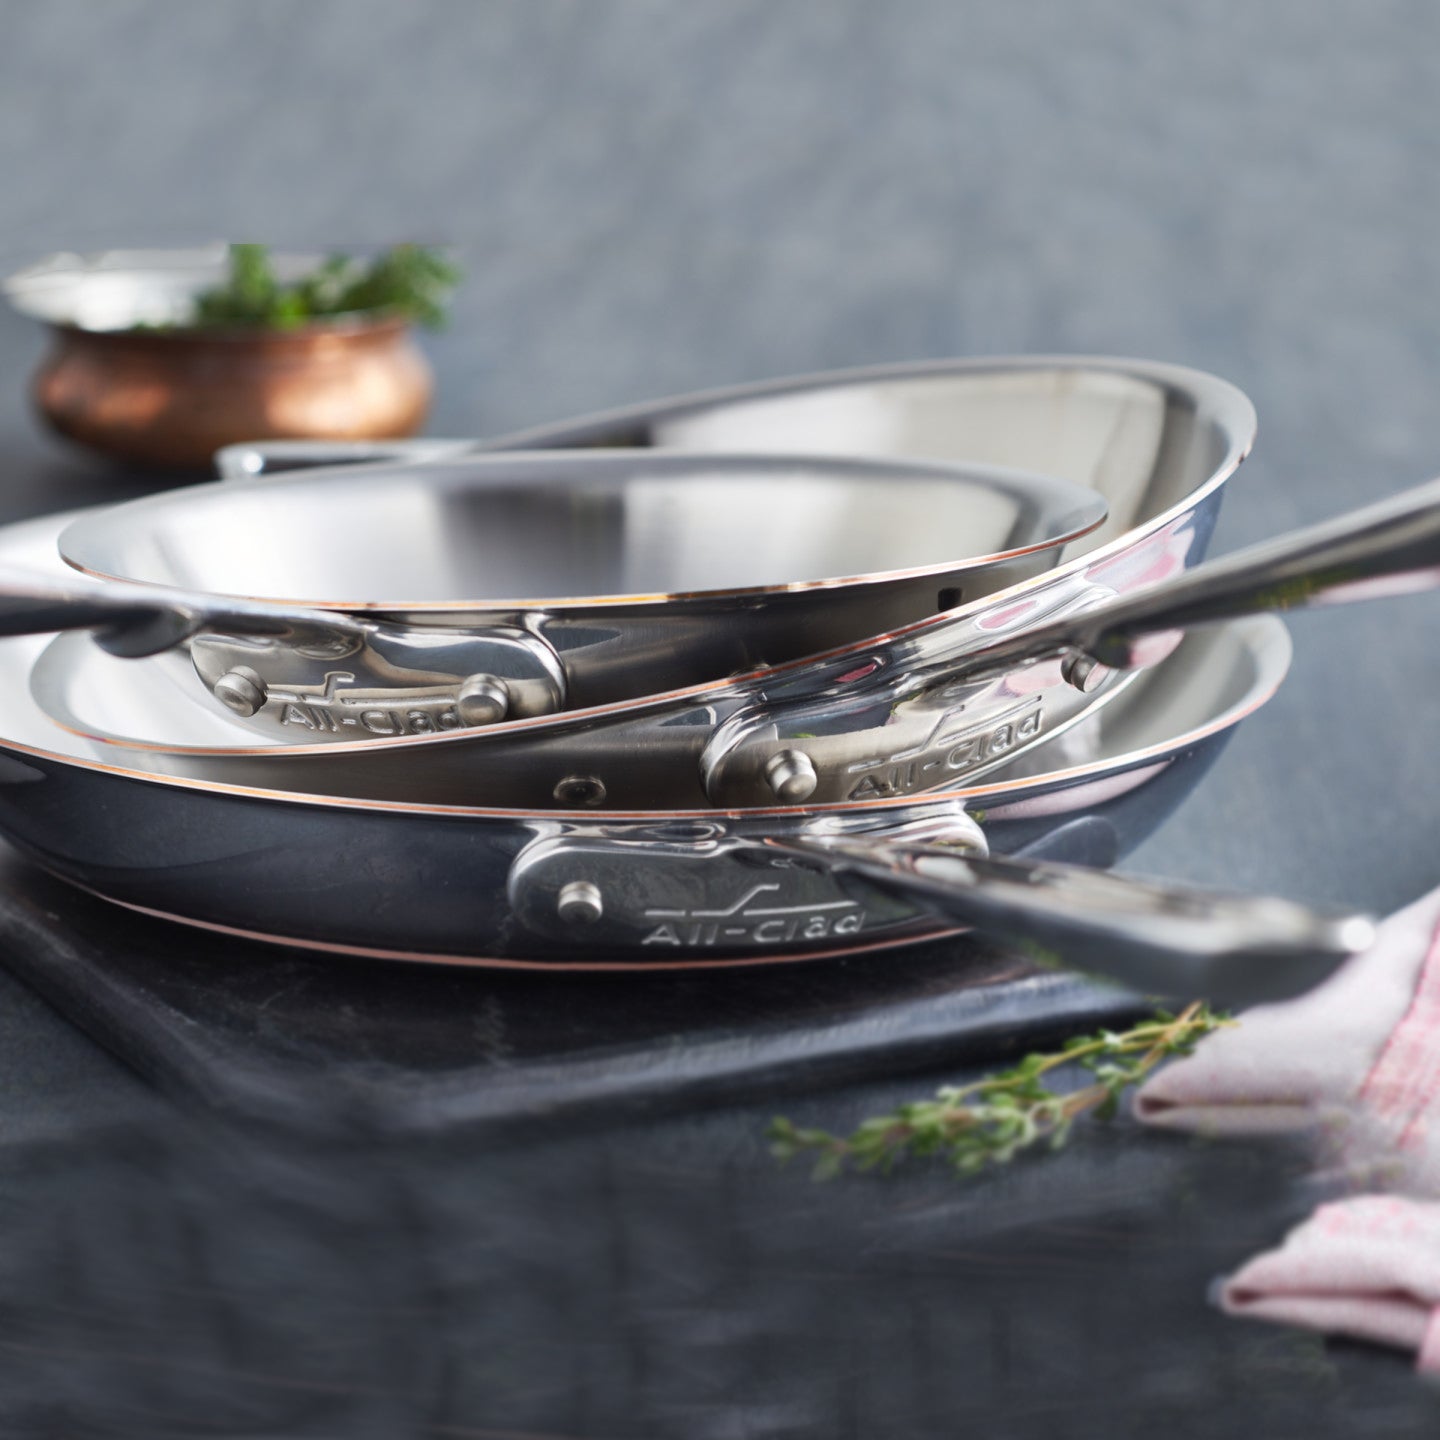 All-Clad Copper Core Frying Pan